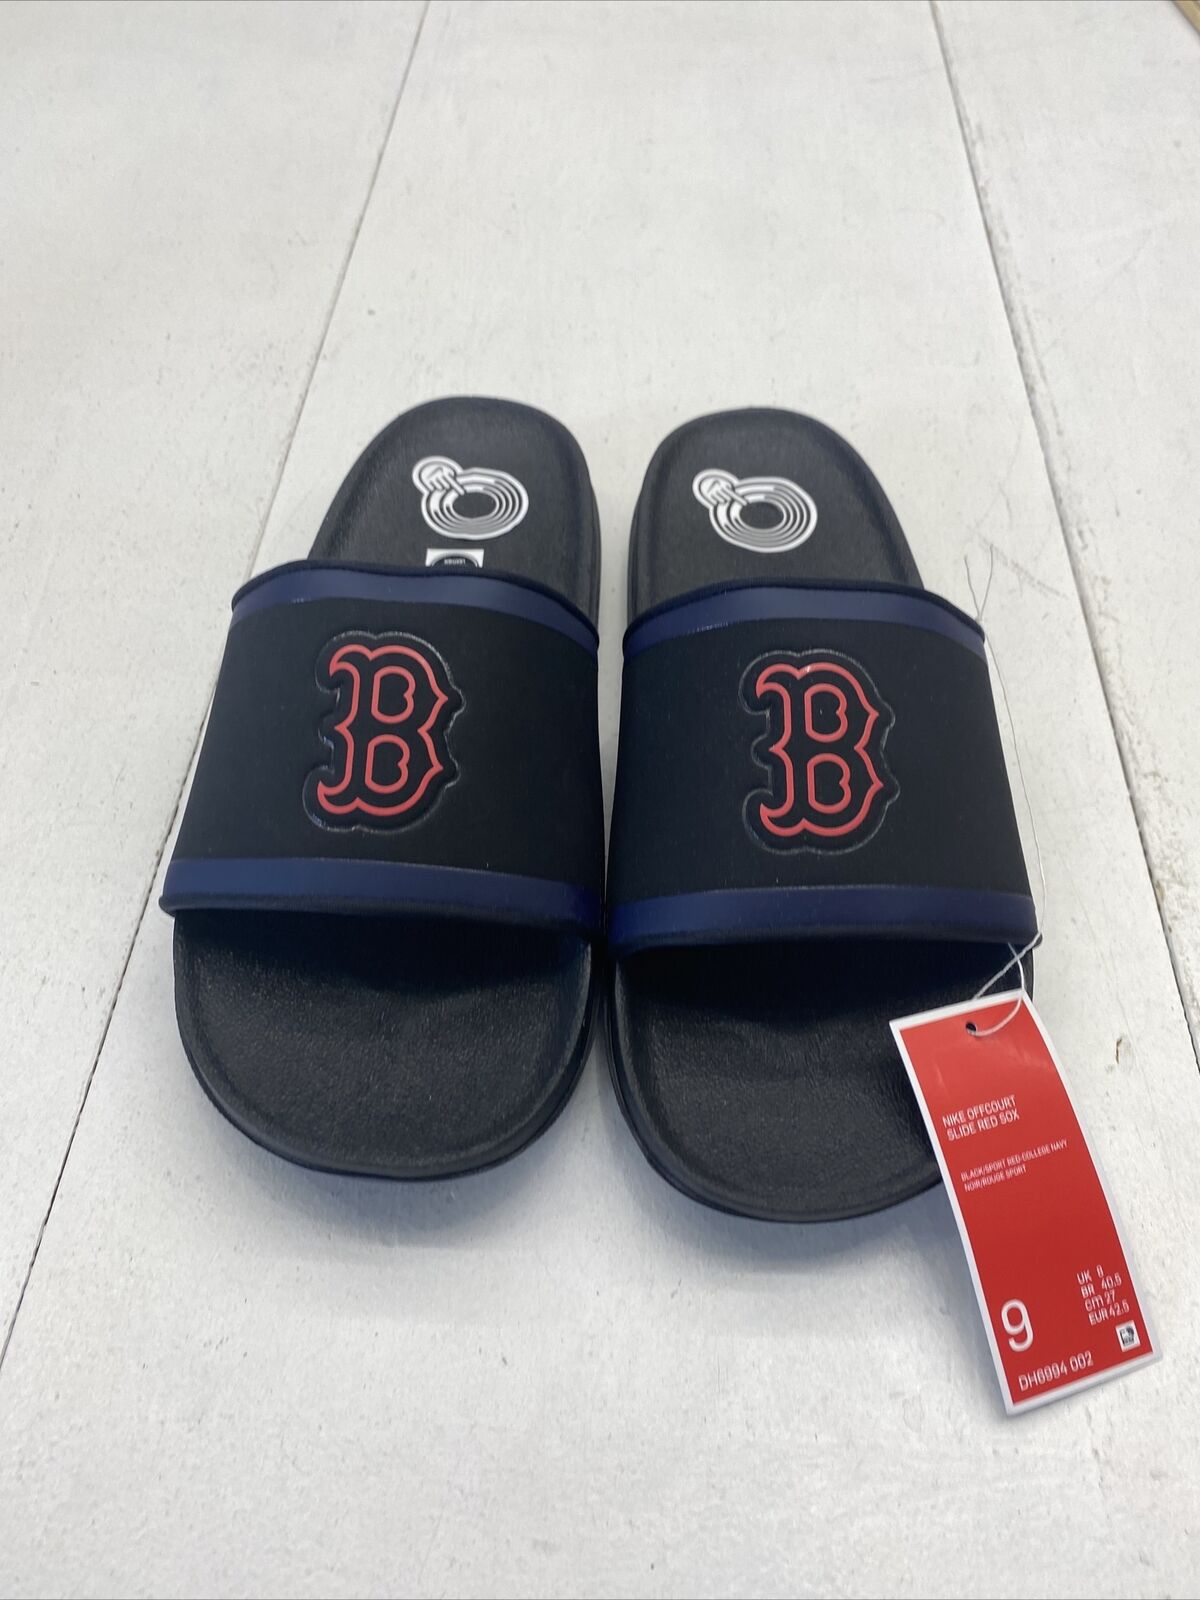 NIKE Offcourt Boston Red Sox Slides Black Blue Red Size 9 NEW